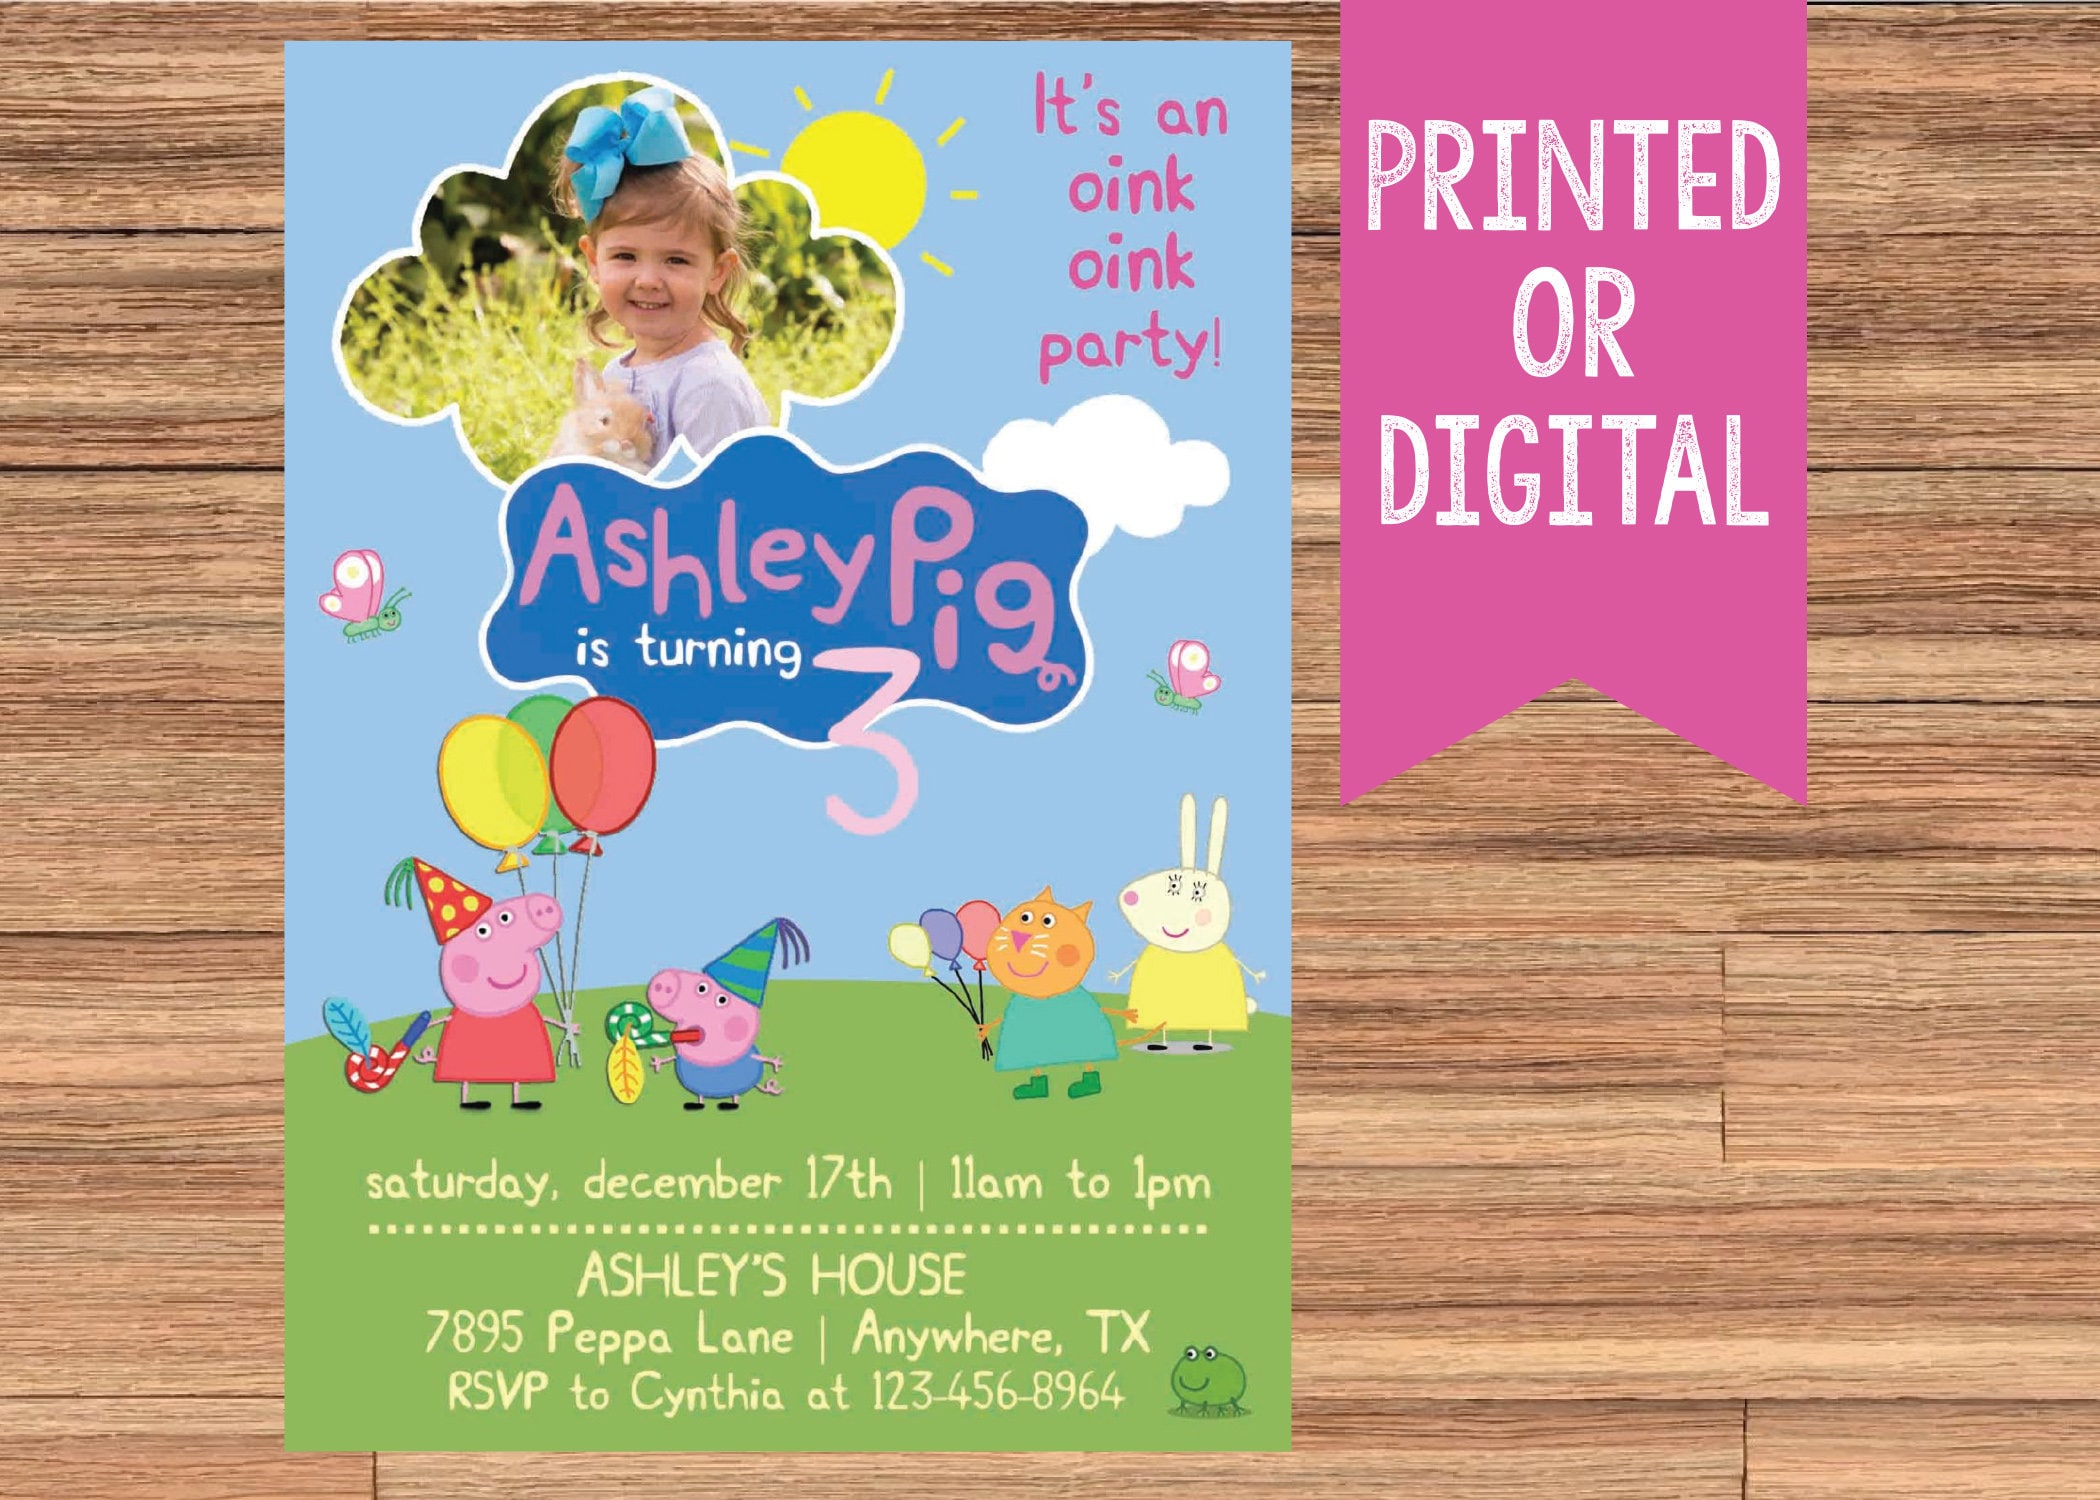 2 Options Peppa Pig Train Birthday Invitation with Photo or without Photo Print at Home. Digital File All Aboard Peppa /& Friends